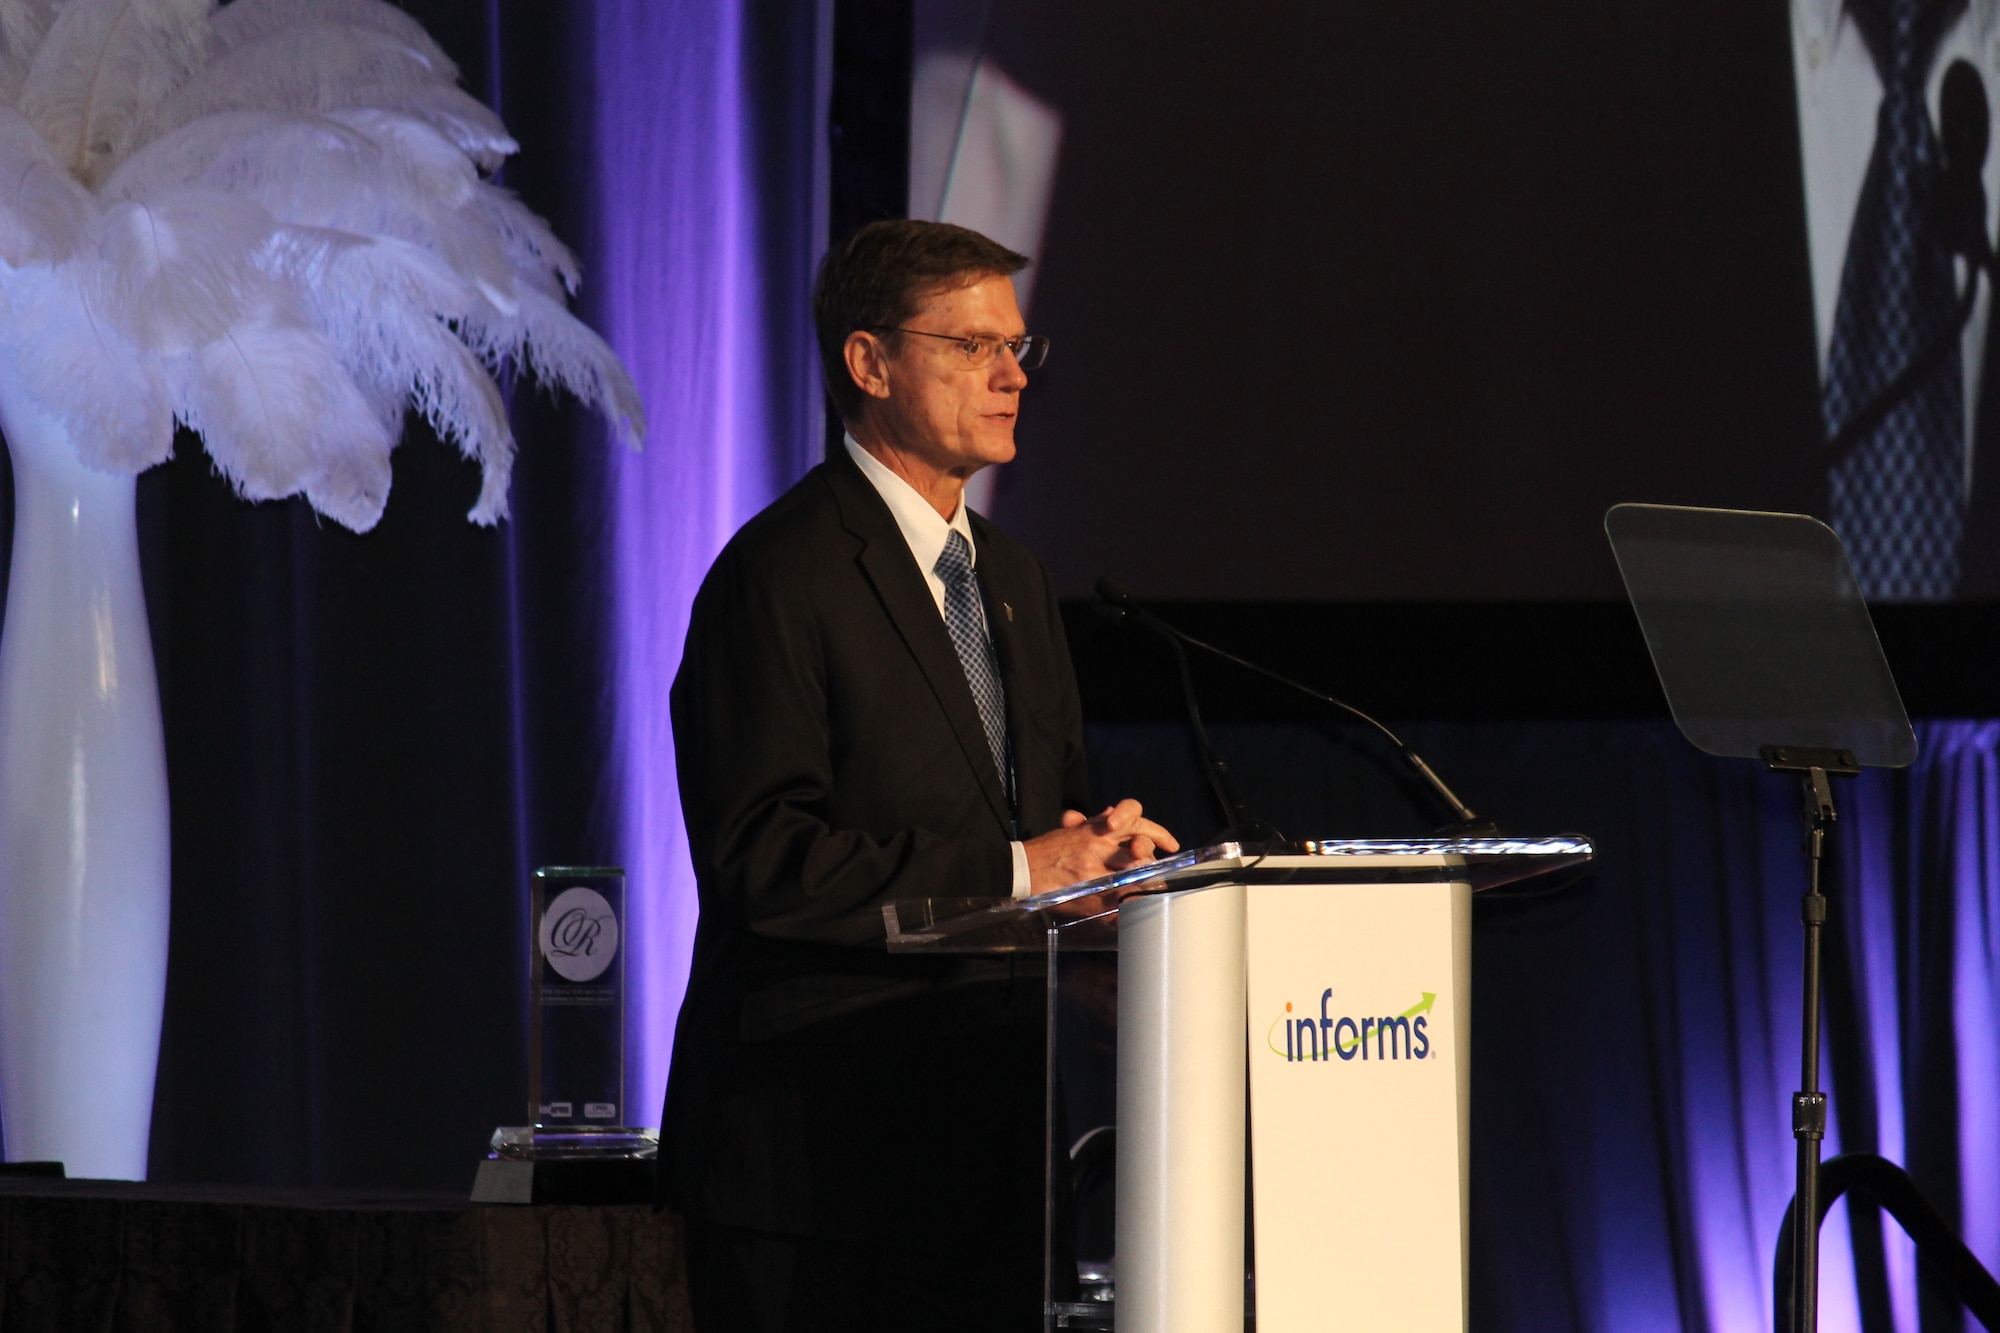 Kevin Williams, the director of Air Force studies, analyses and assessments, speaks after accepting the INFORMS Prize award on behalf of the Air Force Studies, Analysis and Assessments directorate April 3, 2017, at a gala in Las Vegas, Nev. The award is given to organizations that have repeatedly applied the principles of operations research in pioneering, carried, novel and lasting ways. (Courtesy photo)